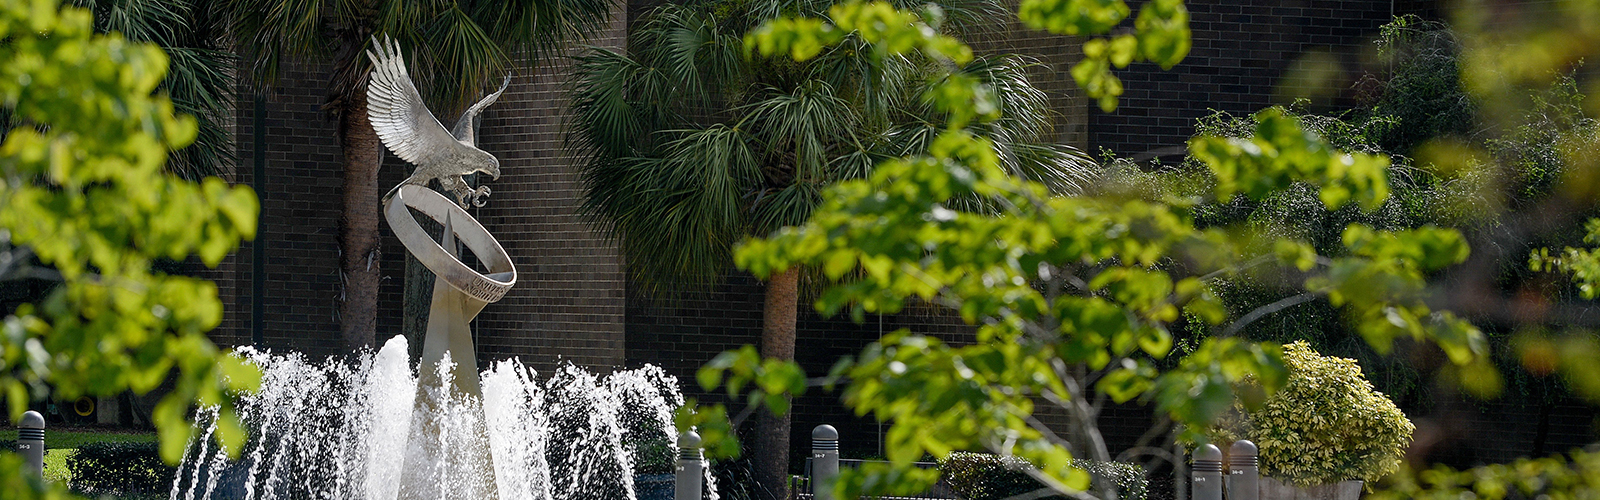 Osprey fountain surrounded by trees and other greenery